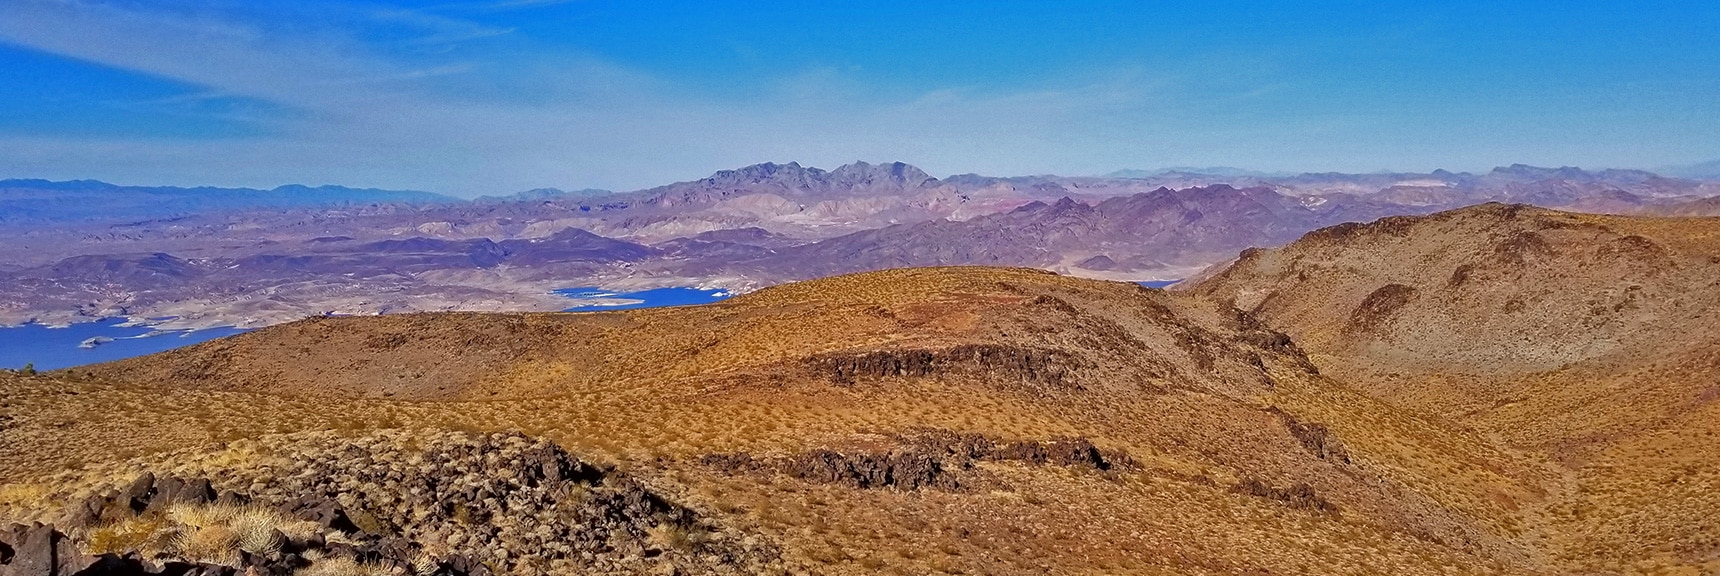 View Toward Black Mesa, Muddy Mts. and Overton from Fortification Hill Summit. | Fortification Hill | Lake Mead National Recreation Area, Arizona